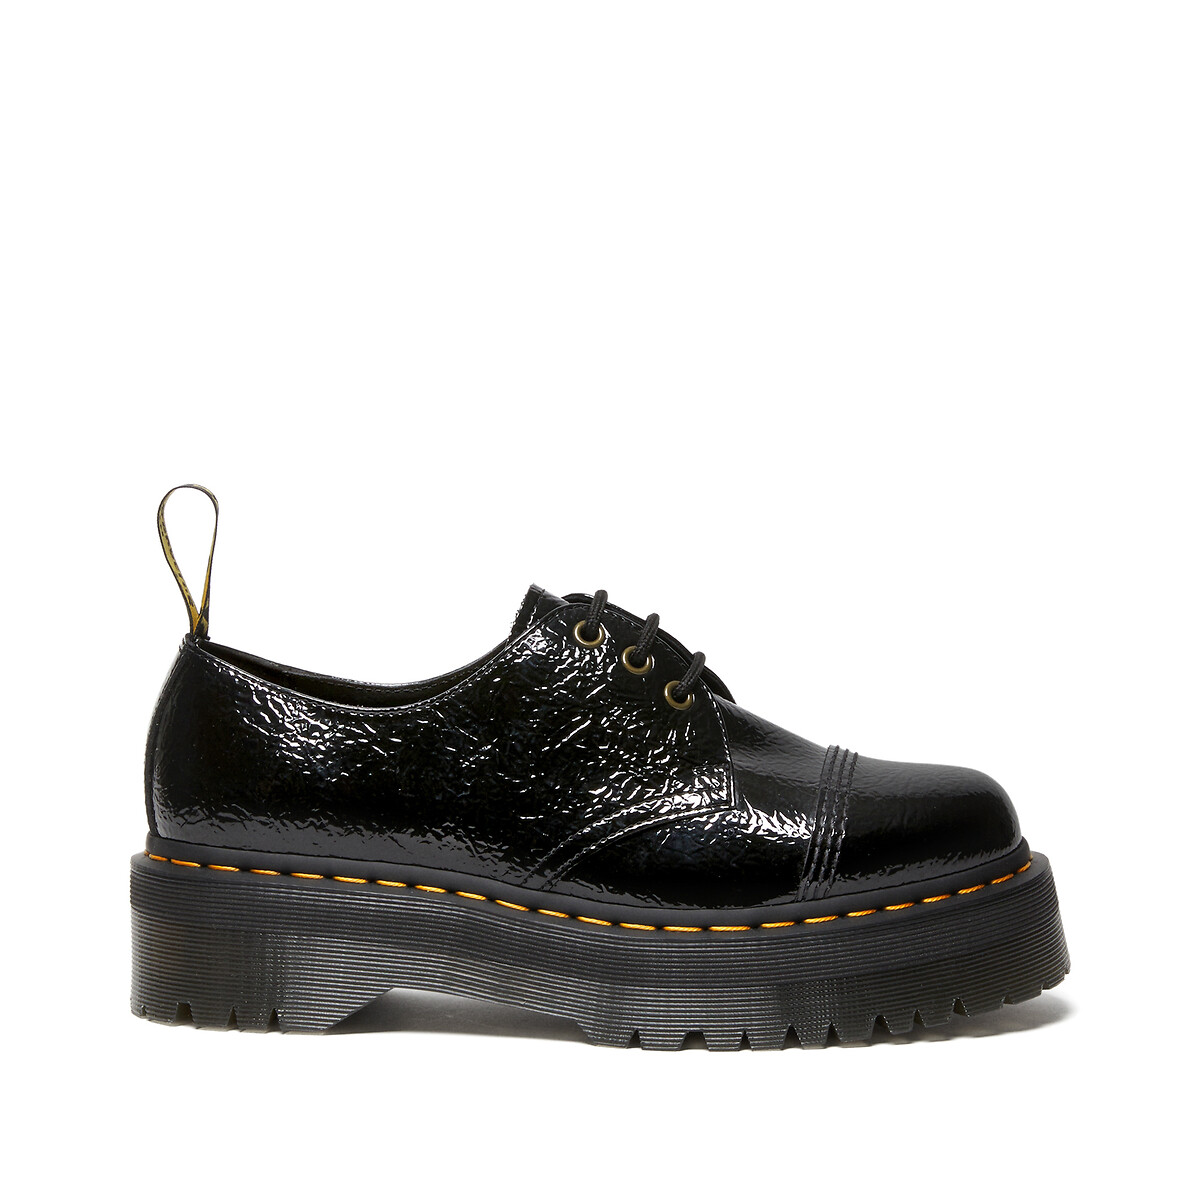 Image of 1461 Quad Distressed Platform Brogues in Patent Leather